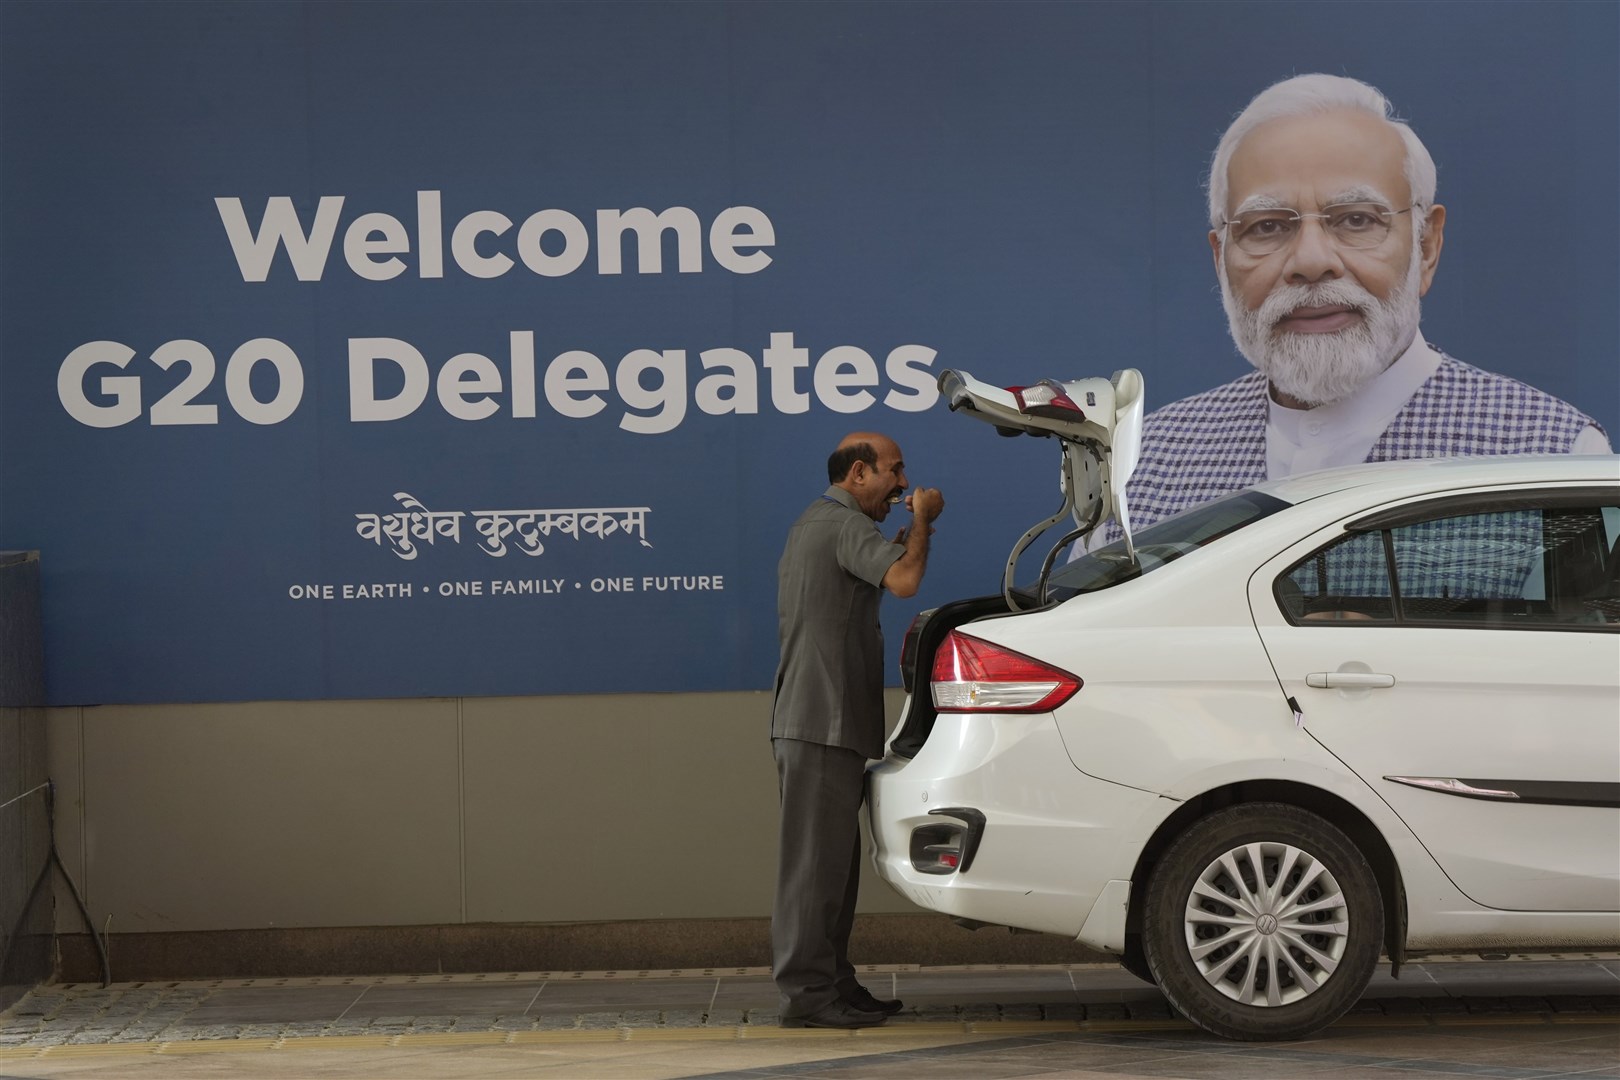 Narendra Modi has been at the centre of advertising for the G20 in India (Manish Swarup/AP)